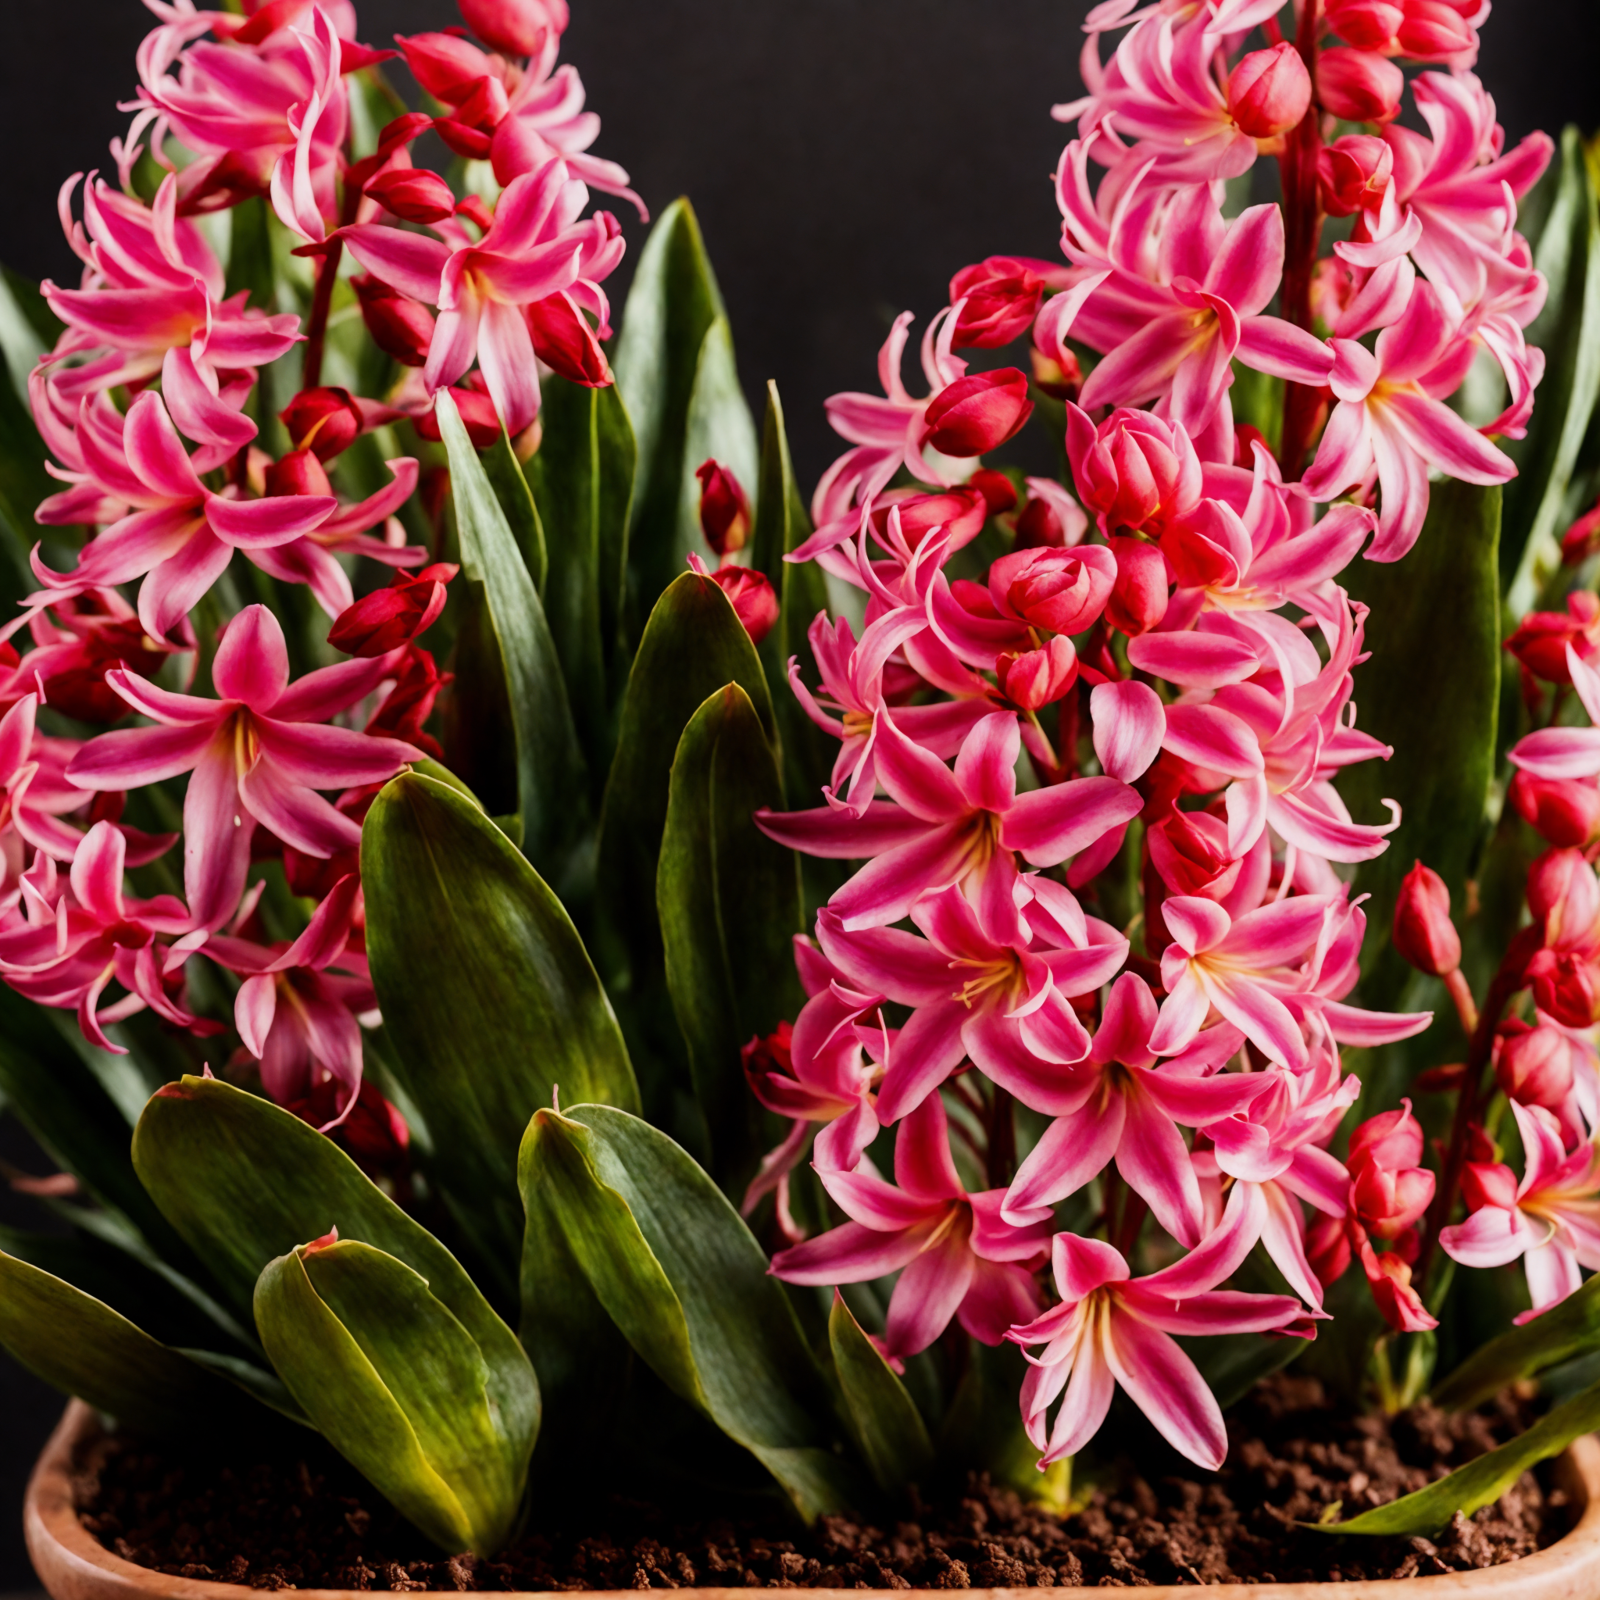 Cluster of pink Hyacinthus orientalis flowers in a planter with clear lighting and a dark background.